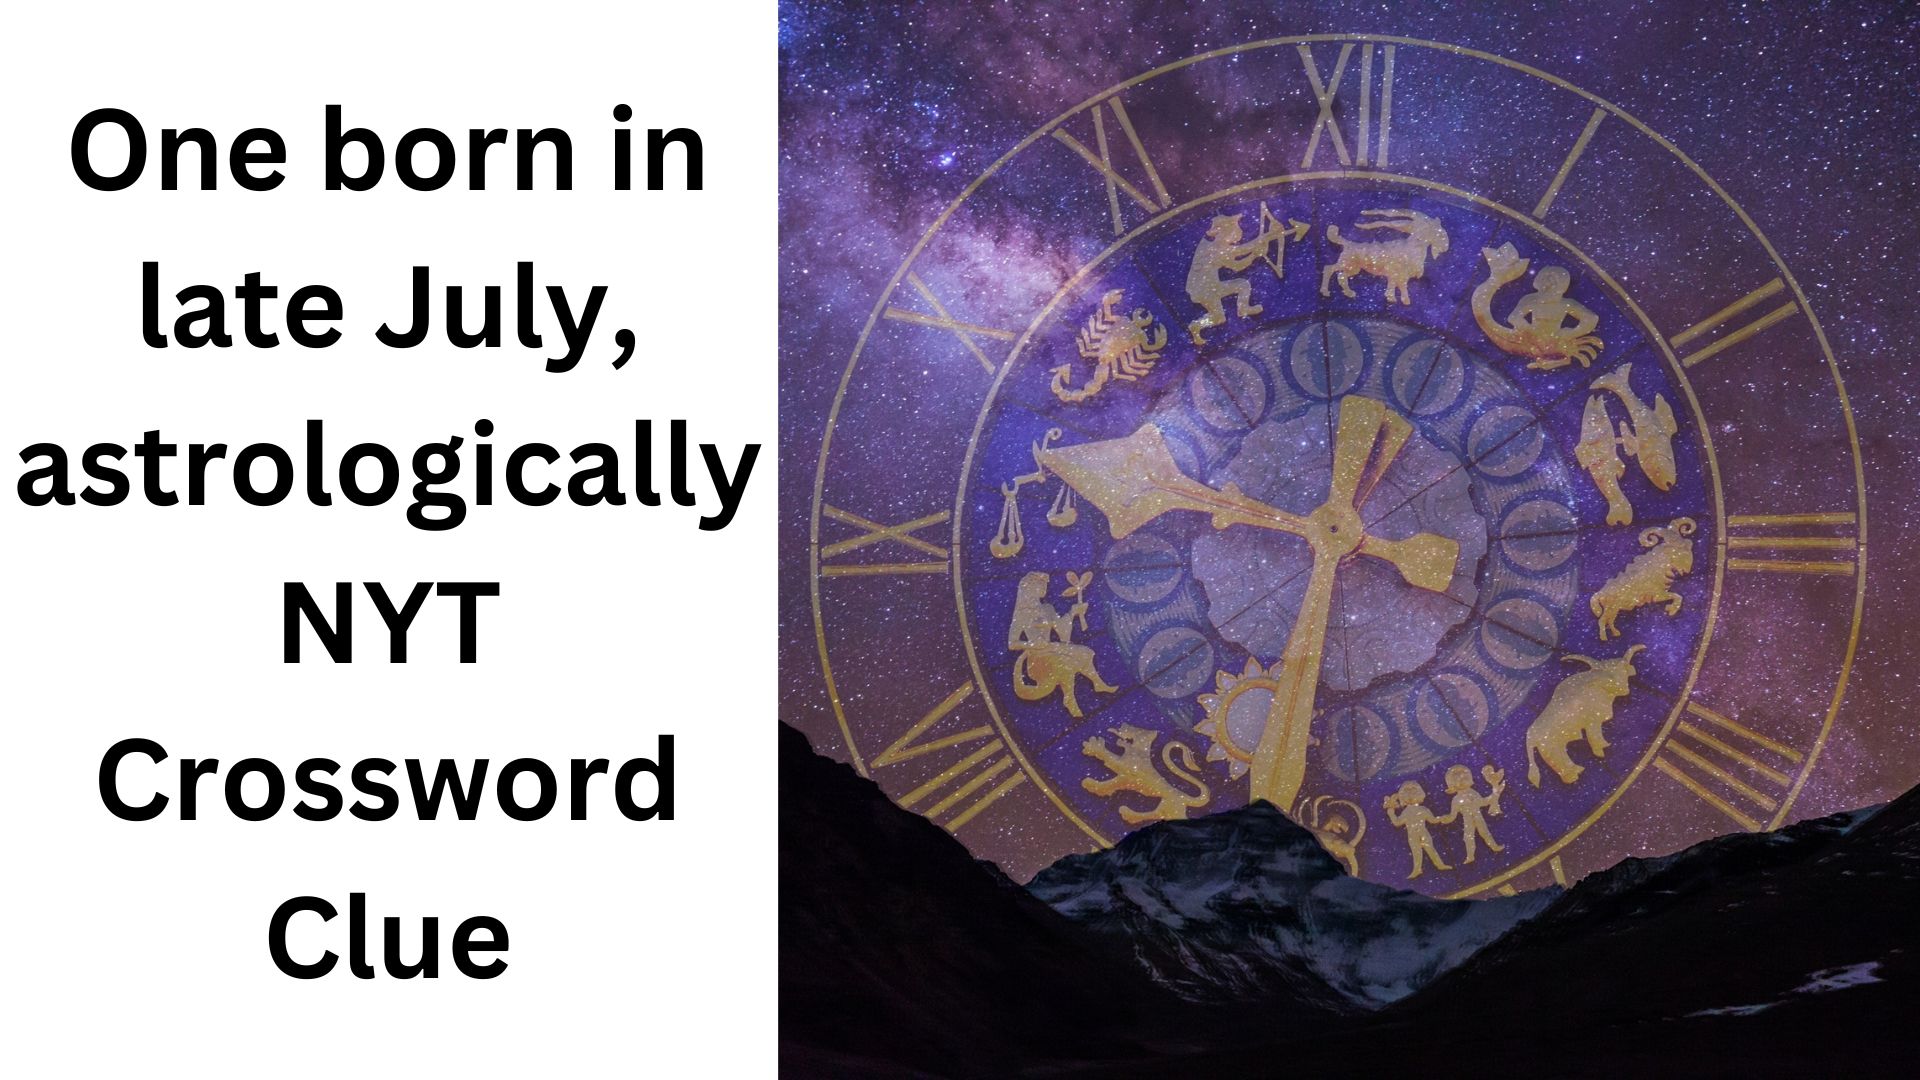 One born in late July, astrologically NYT Crossword Clue